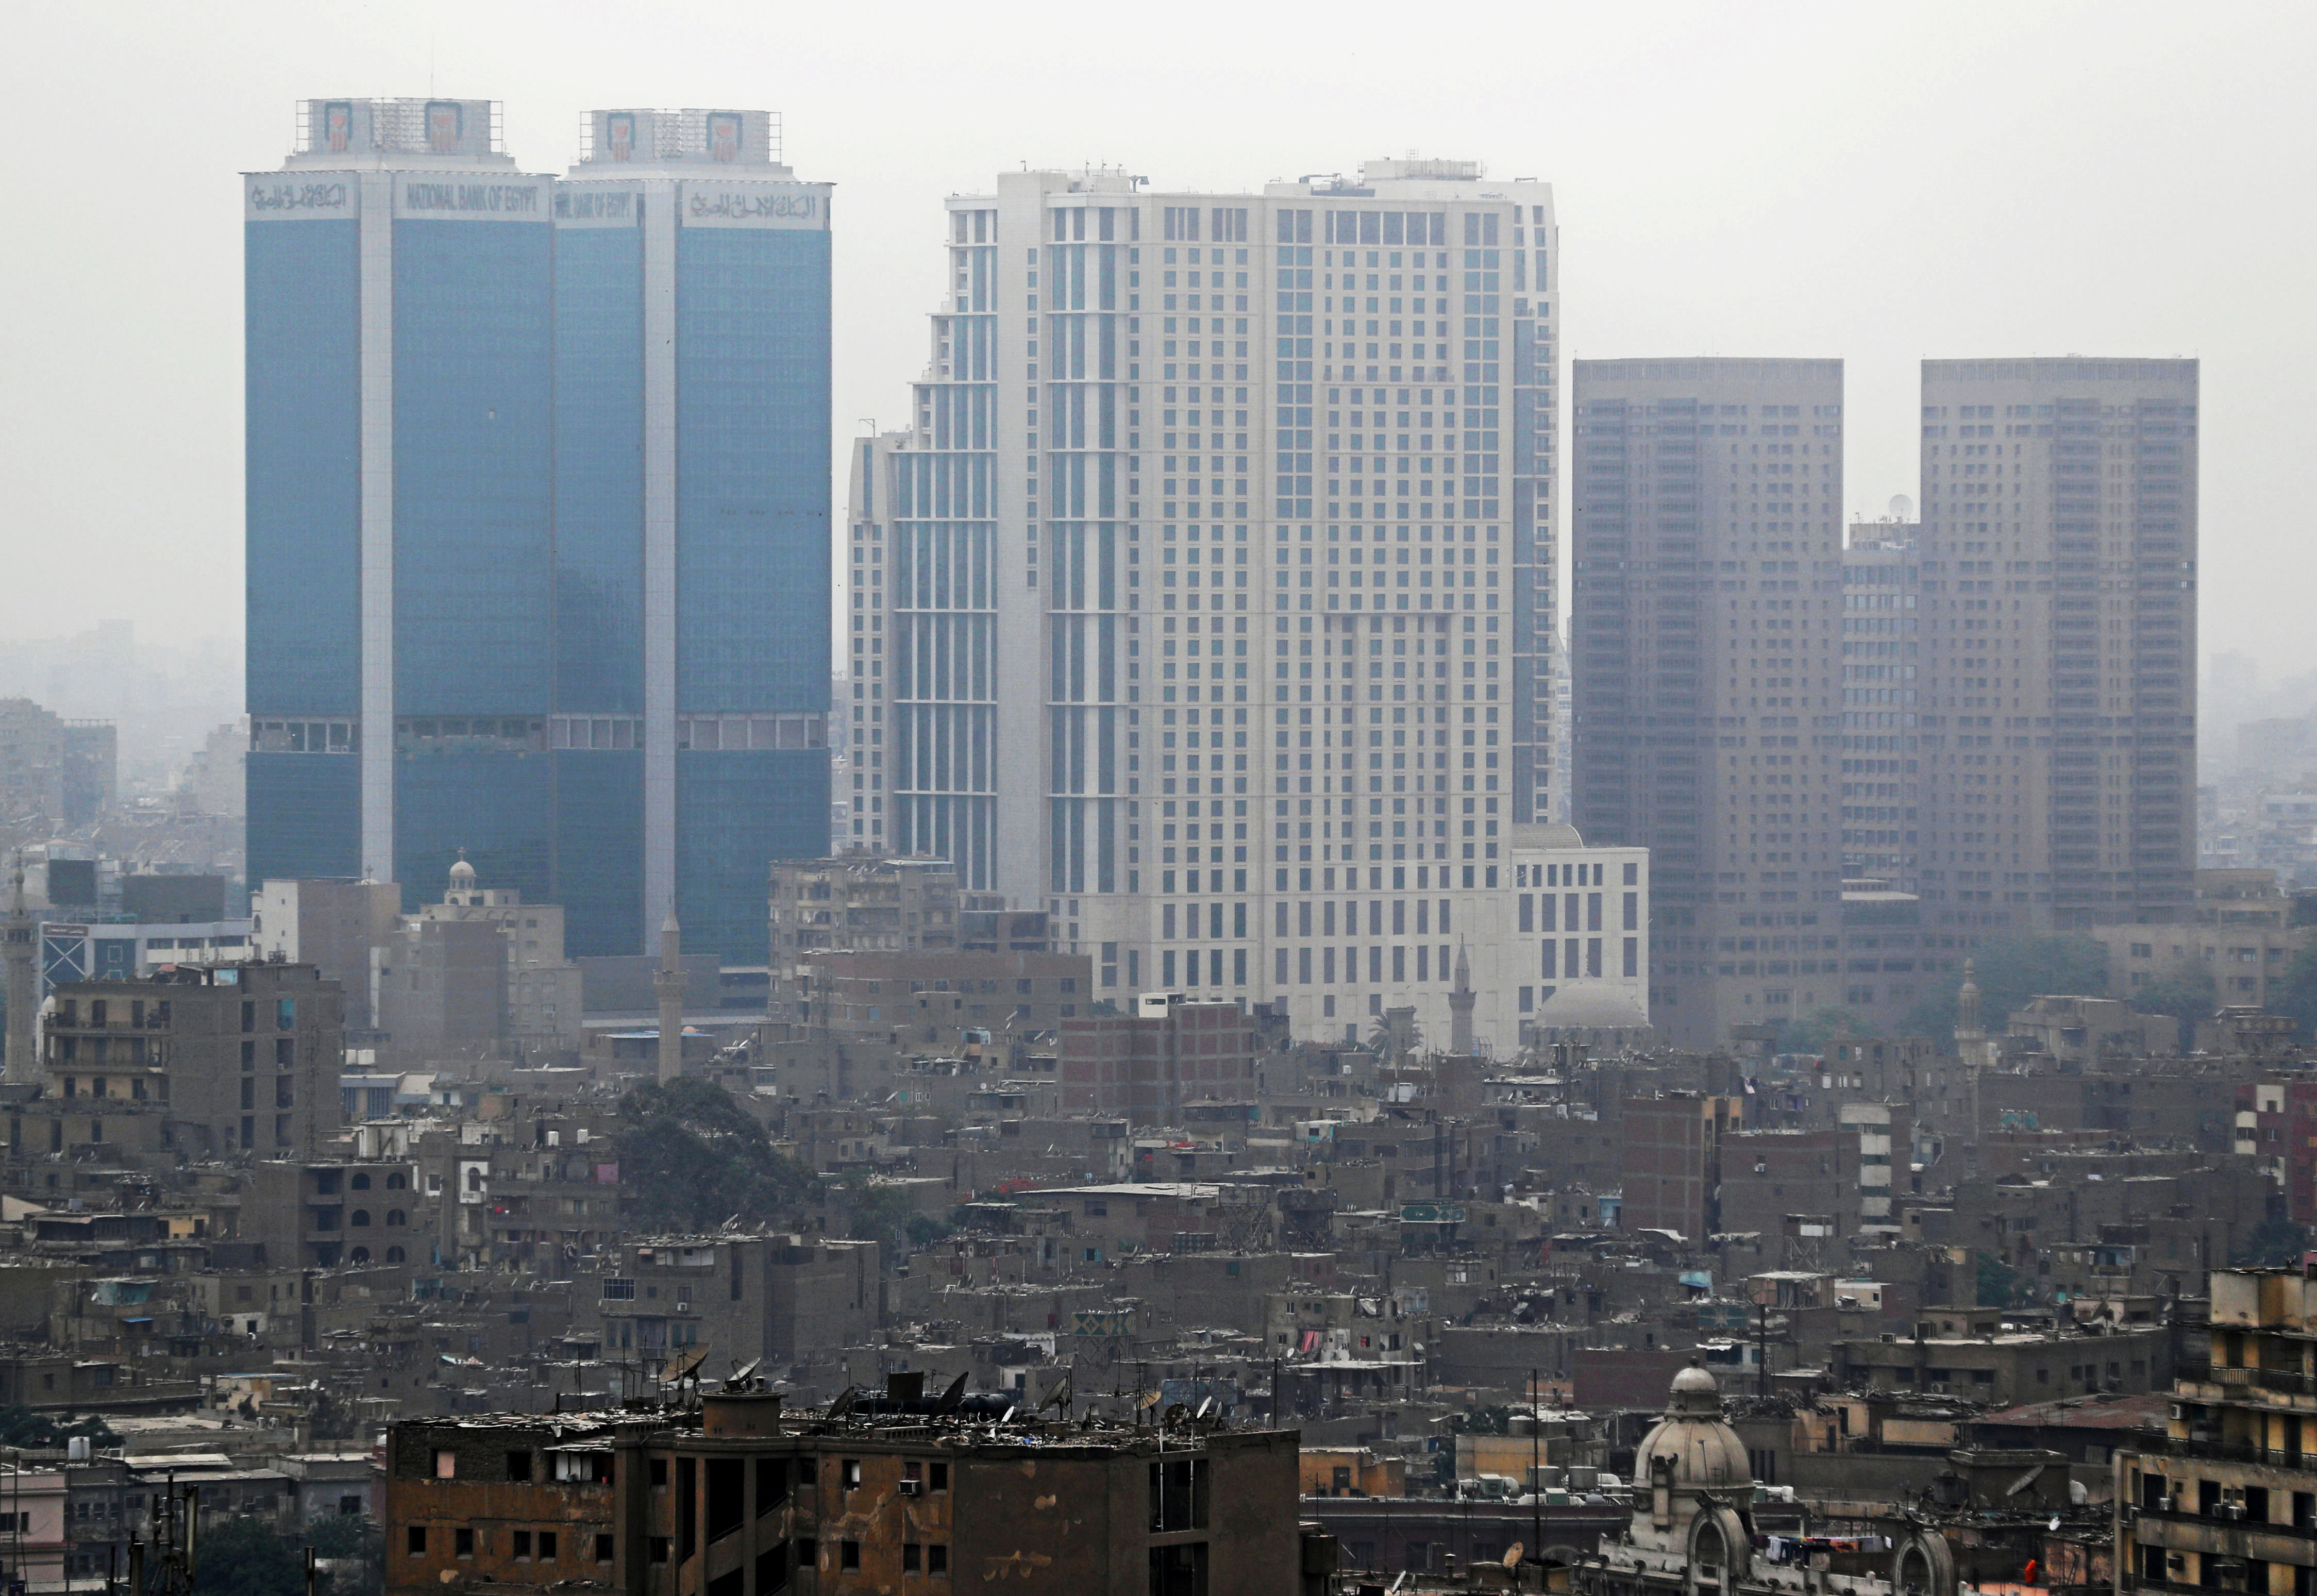 National Bank of Egypt head offices, the St. Regis Cairo hotel and Hilton Cairo World Trade Center Residences are seen towering above residential buildings in the downtown Cairo